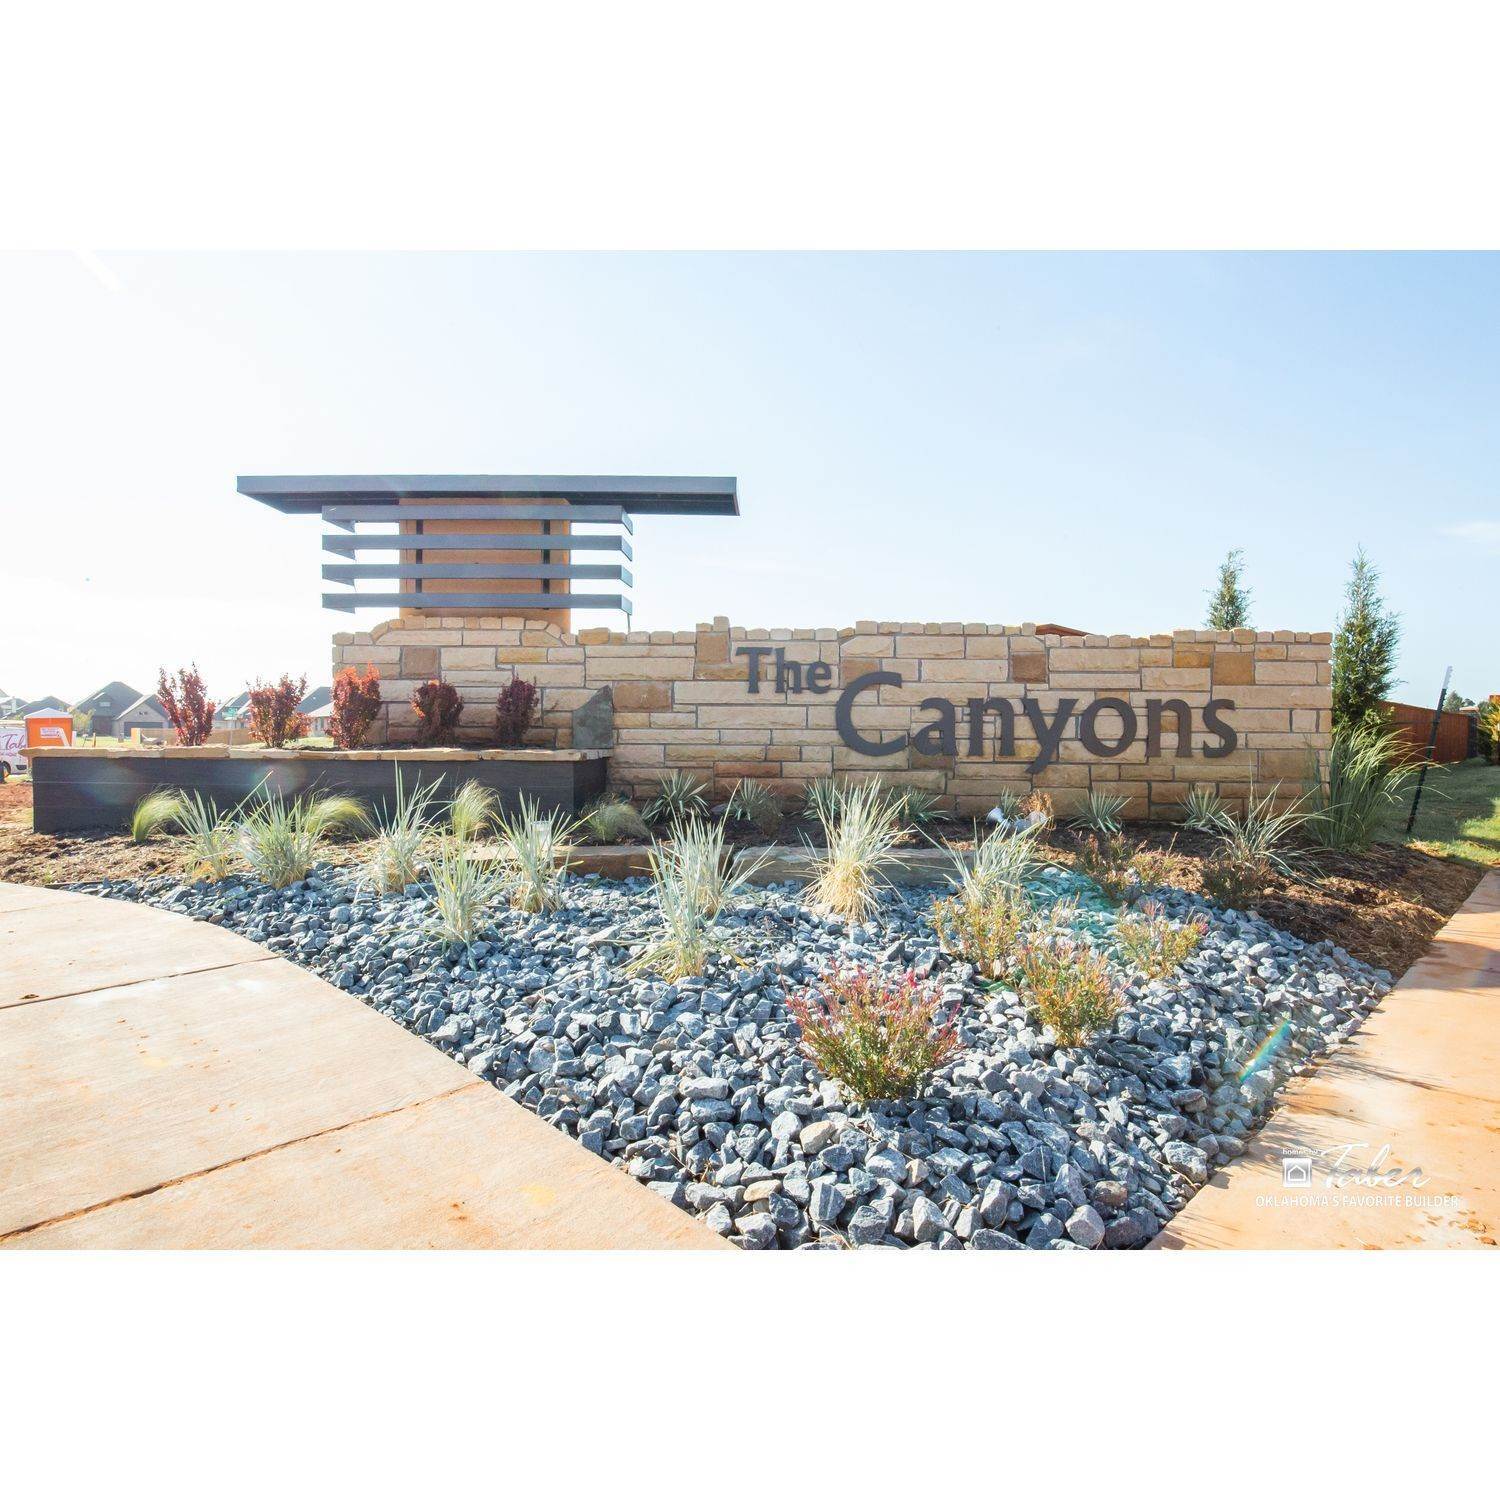 50. Canyons建於 10533 SW 52nd St, Mustang, OK 73064